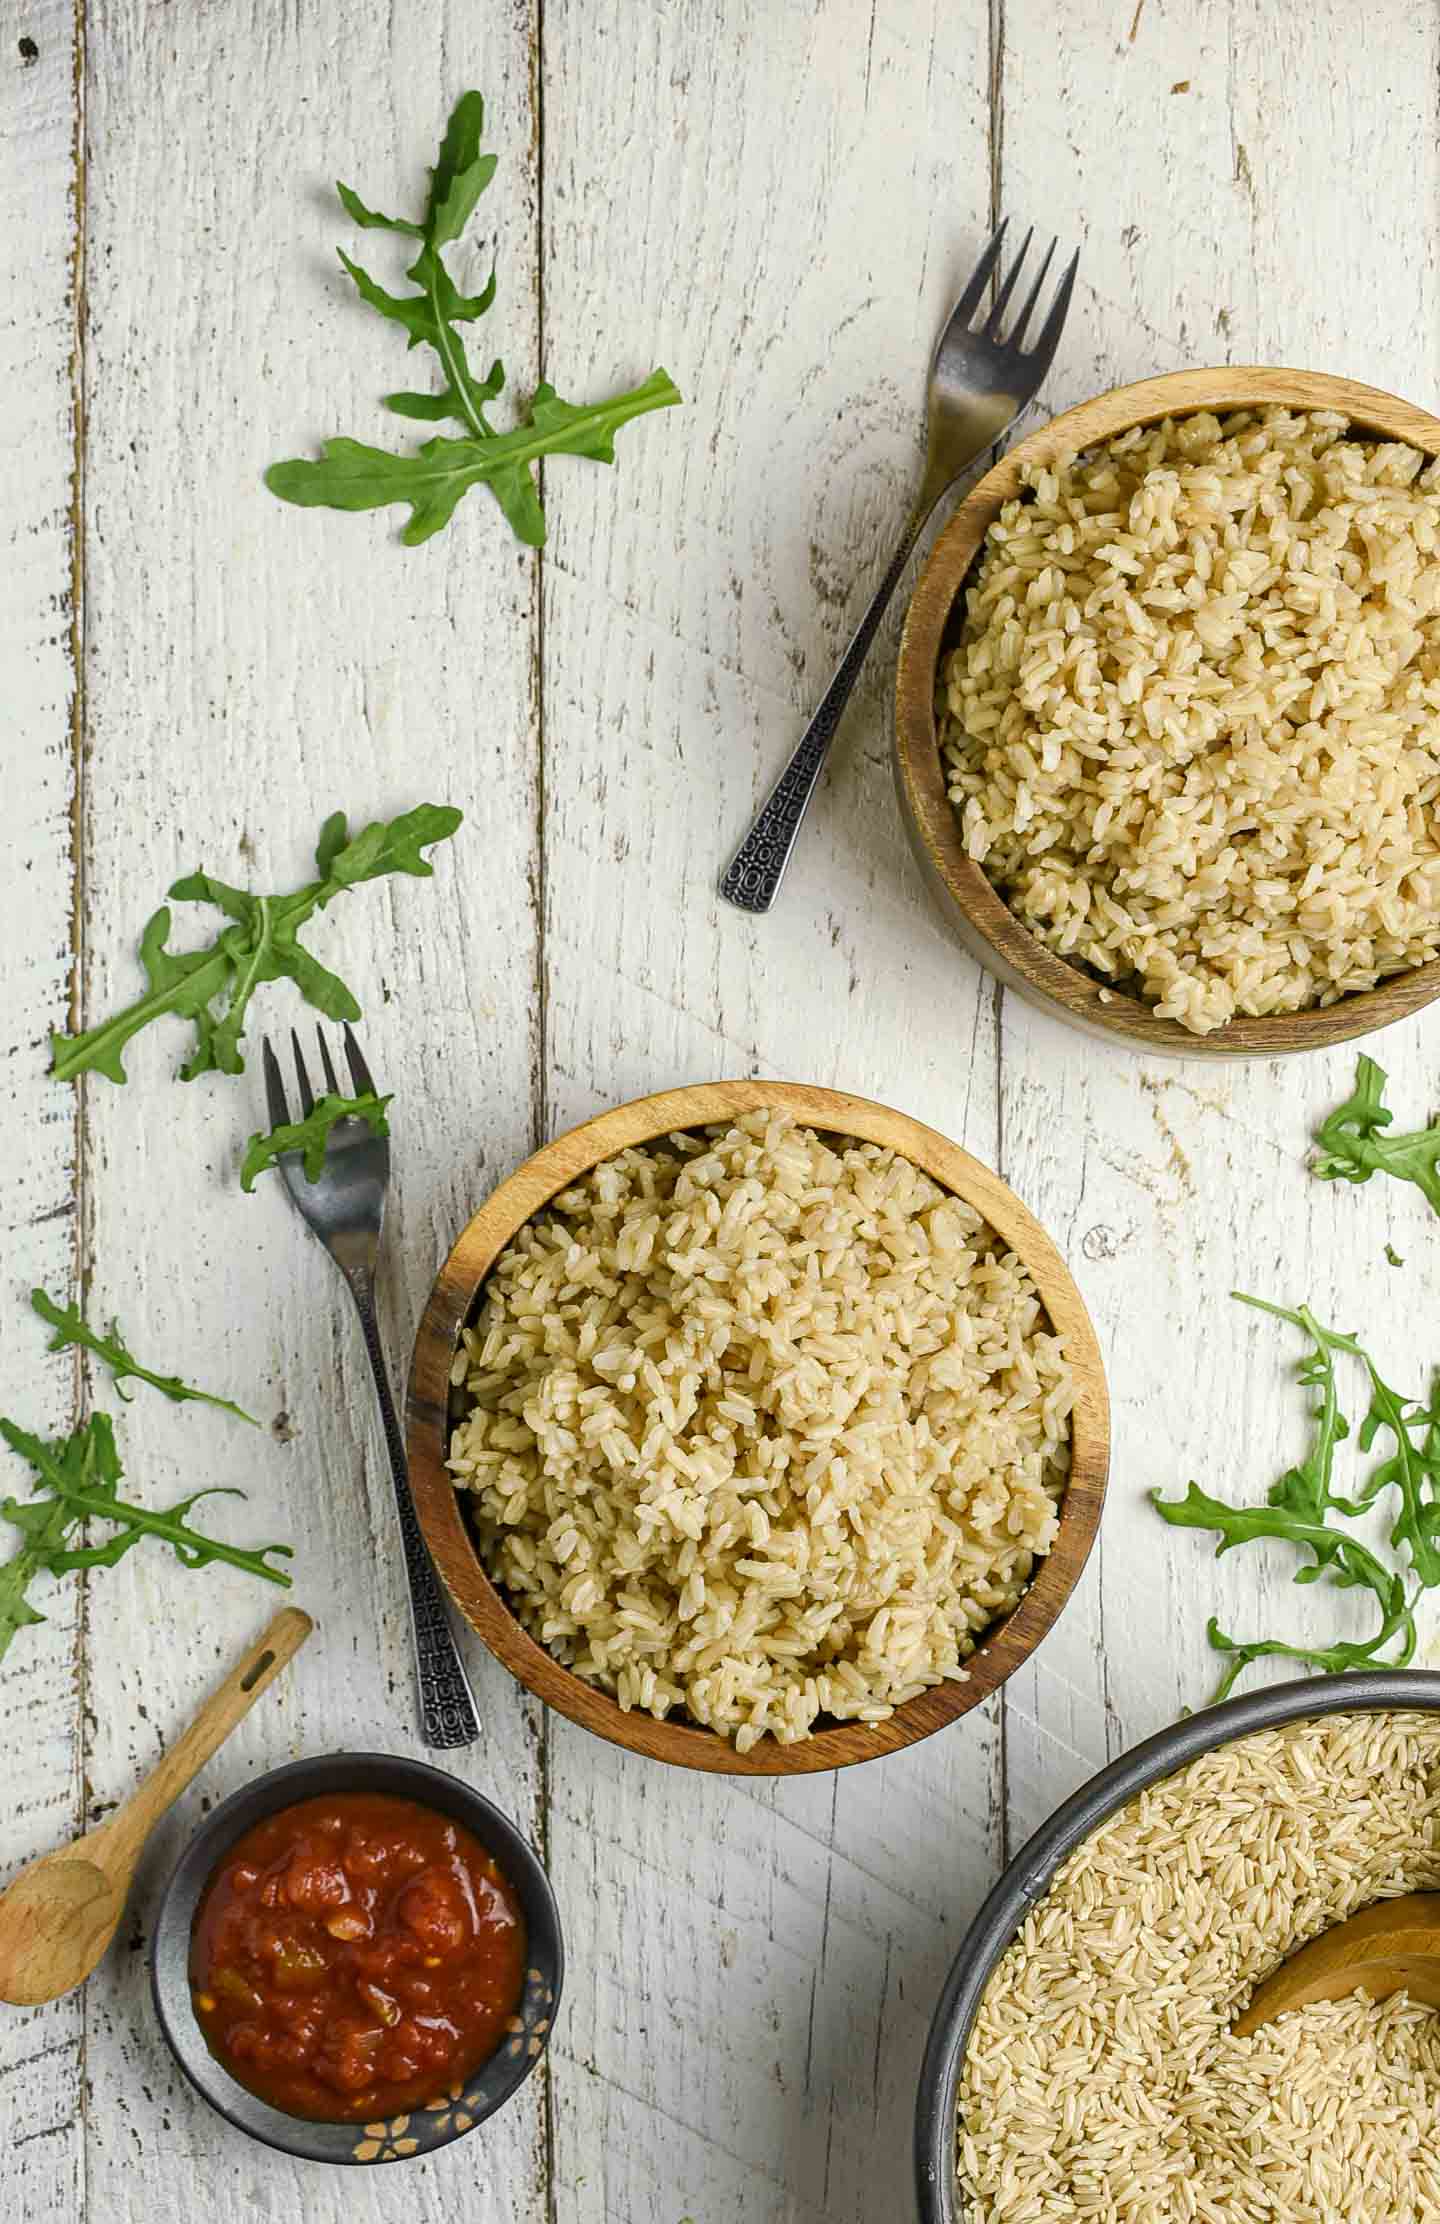 Instant brown rice is so easy to make, delicious, and a perfect hands off recipe.